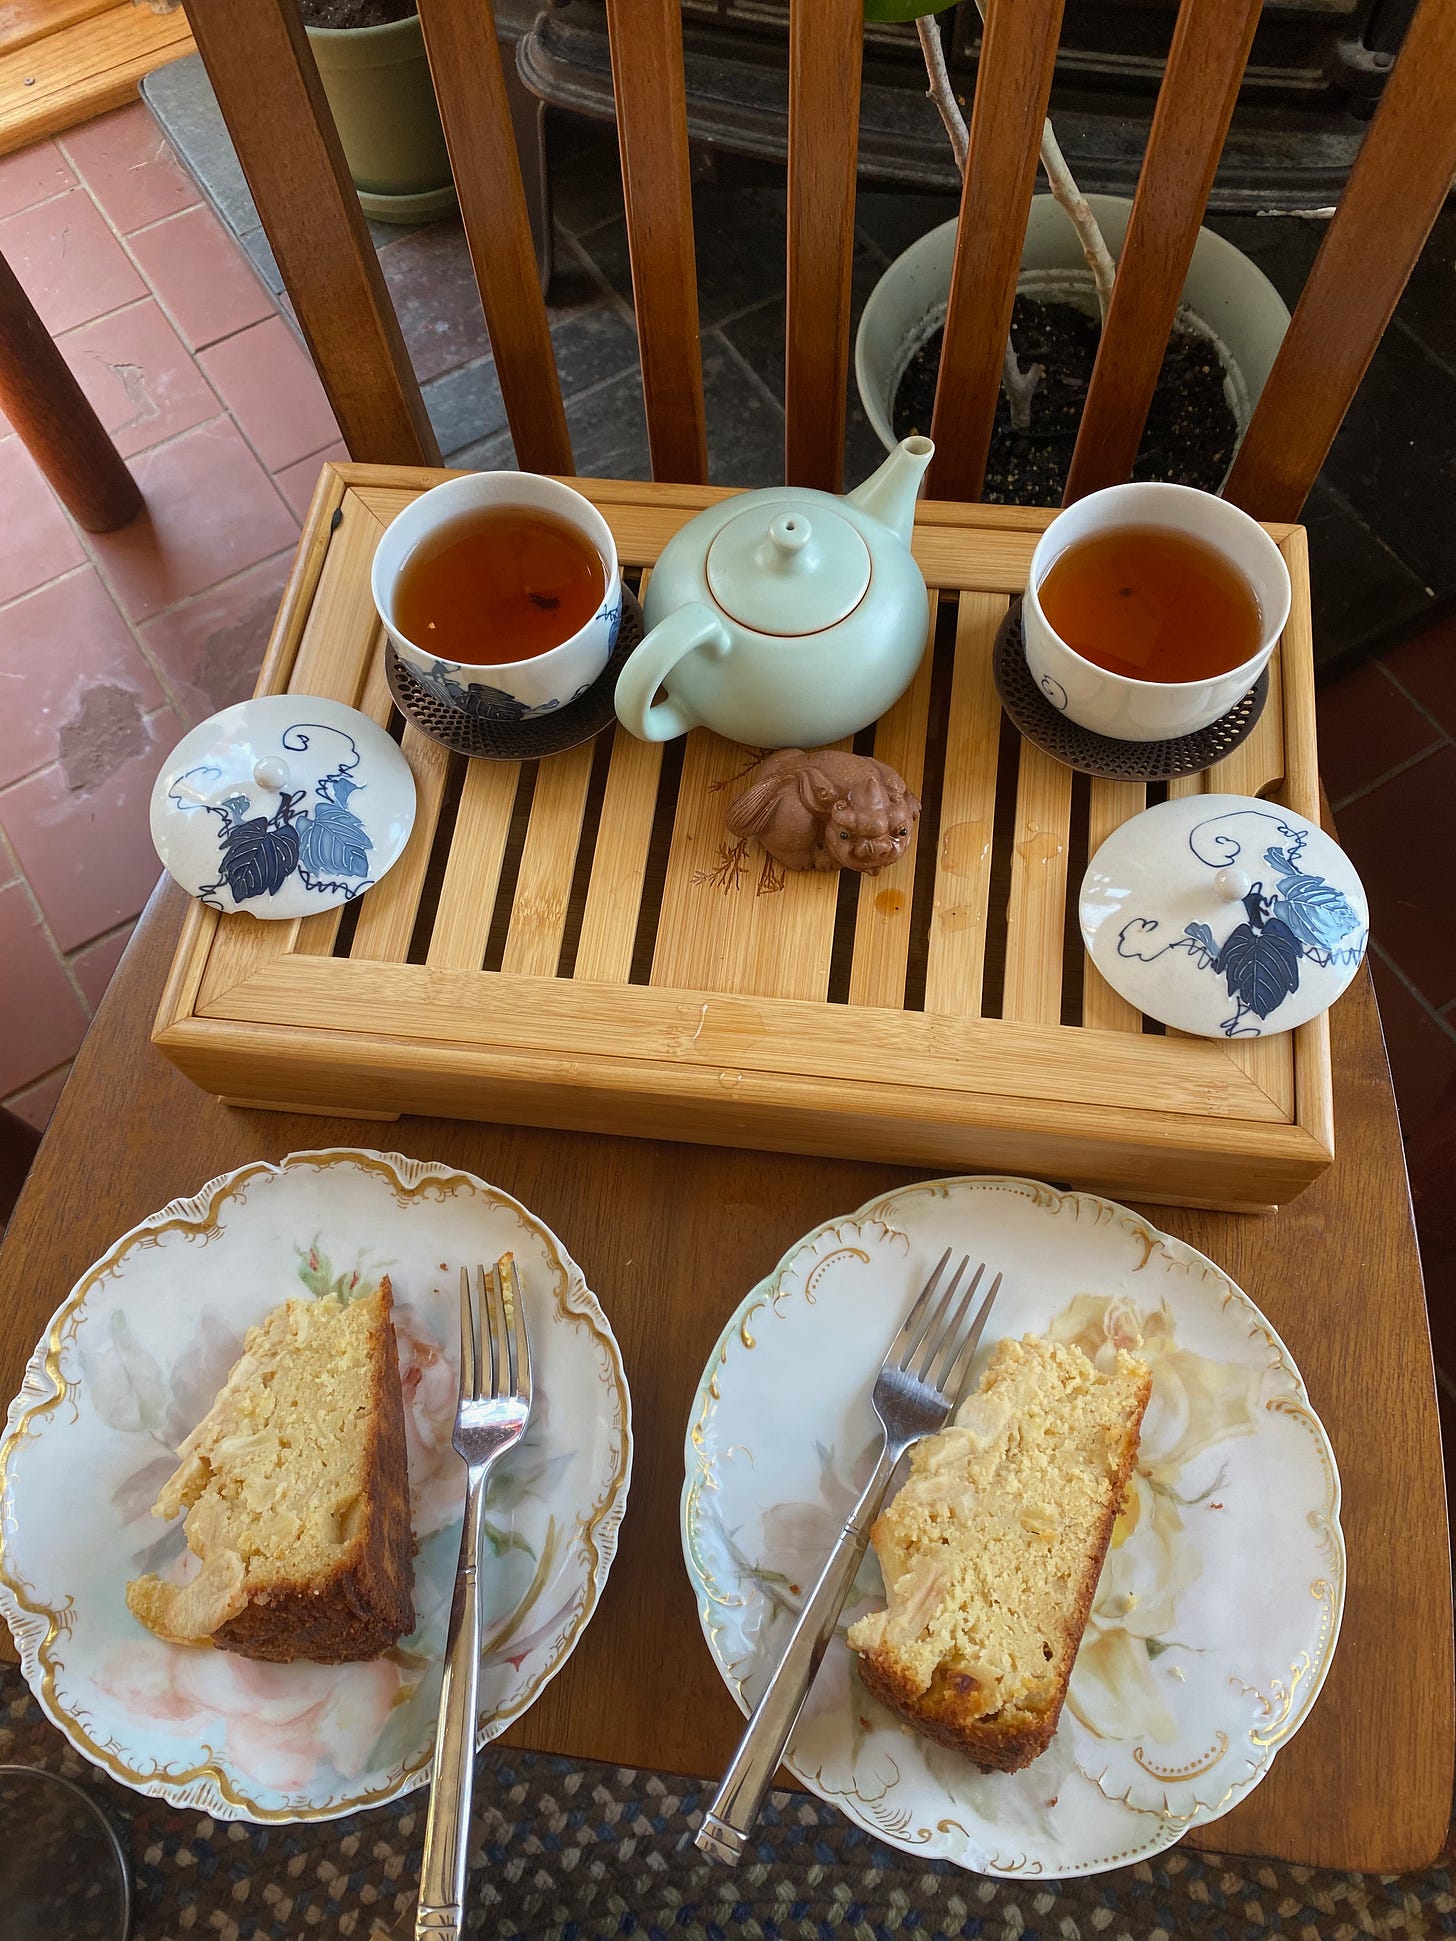 A tea tray on a chair: two small cups of tea, a dragon tea friend, a small porcelain teapot, and two plates of apple-almond cake. 